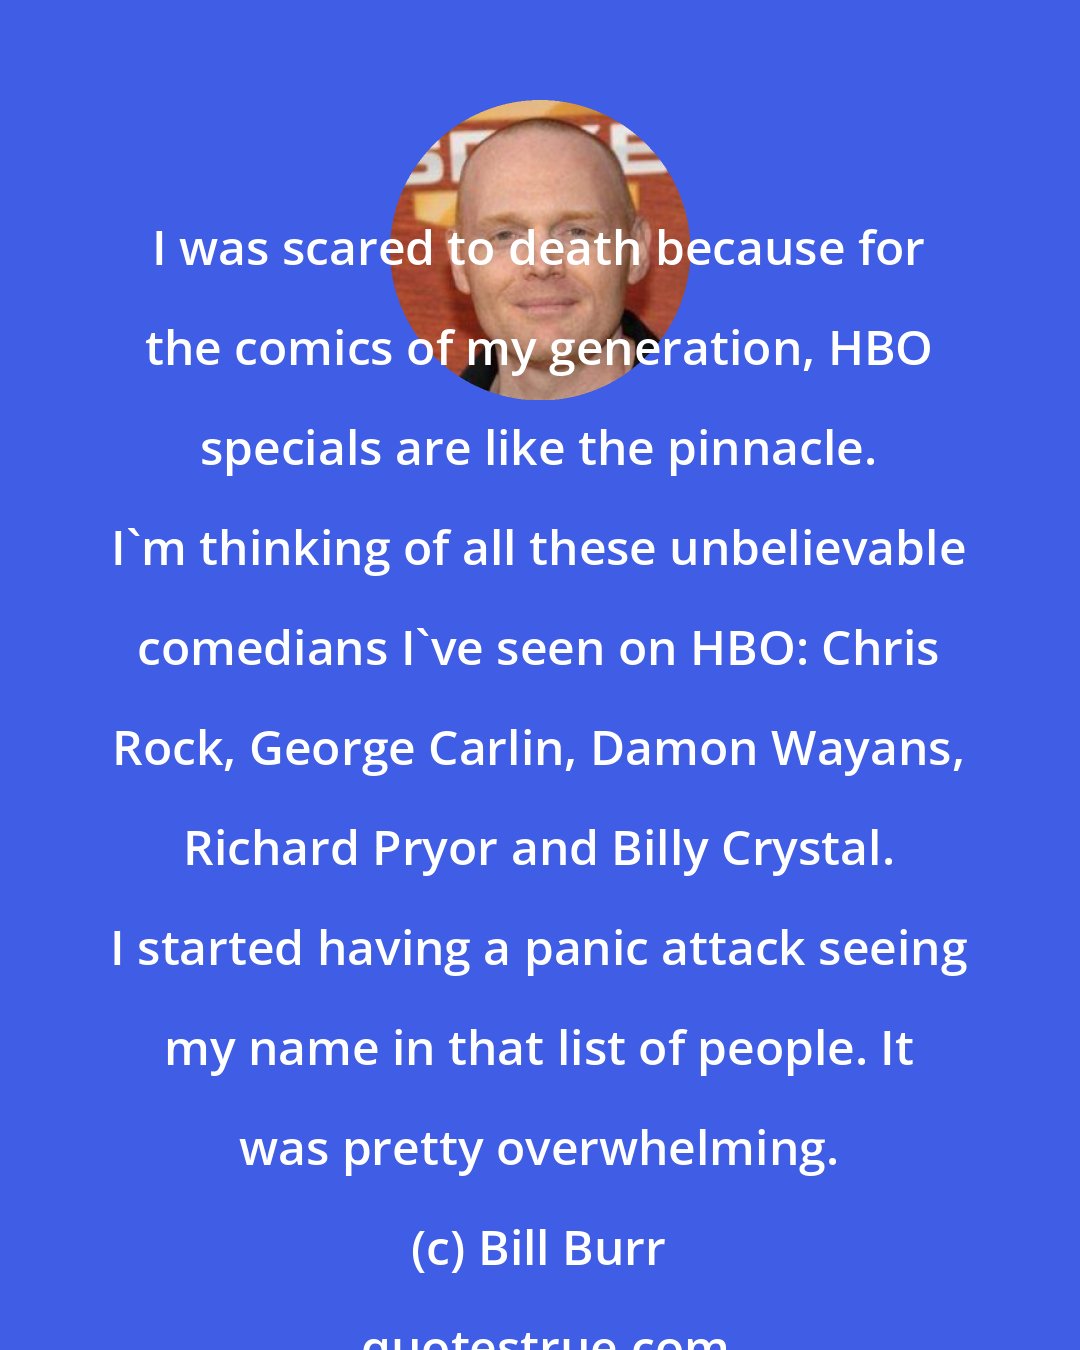 Bill Burr: I was scared to death because for the comics of my generation, HBO specials are like the pinnacle. I'm thinking of all these unbelievable comedians I've seen on HBO: Chris Rock, George Carlin, Damon Wayans, Richard Pryor and Billy Crystal. I started having a panic attack seeing my name in that list of people. It was pretty overwhelming.